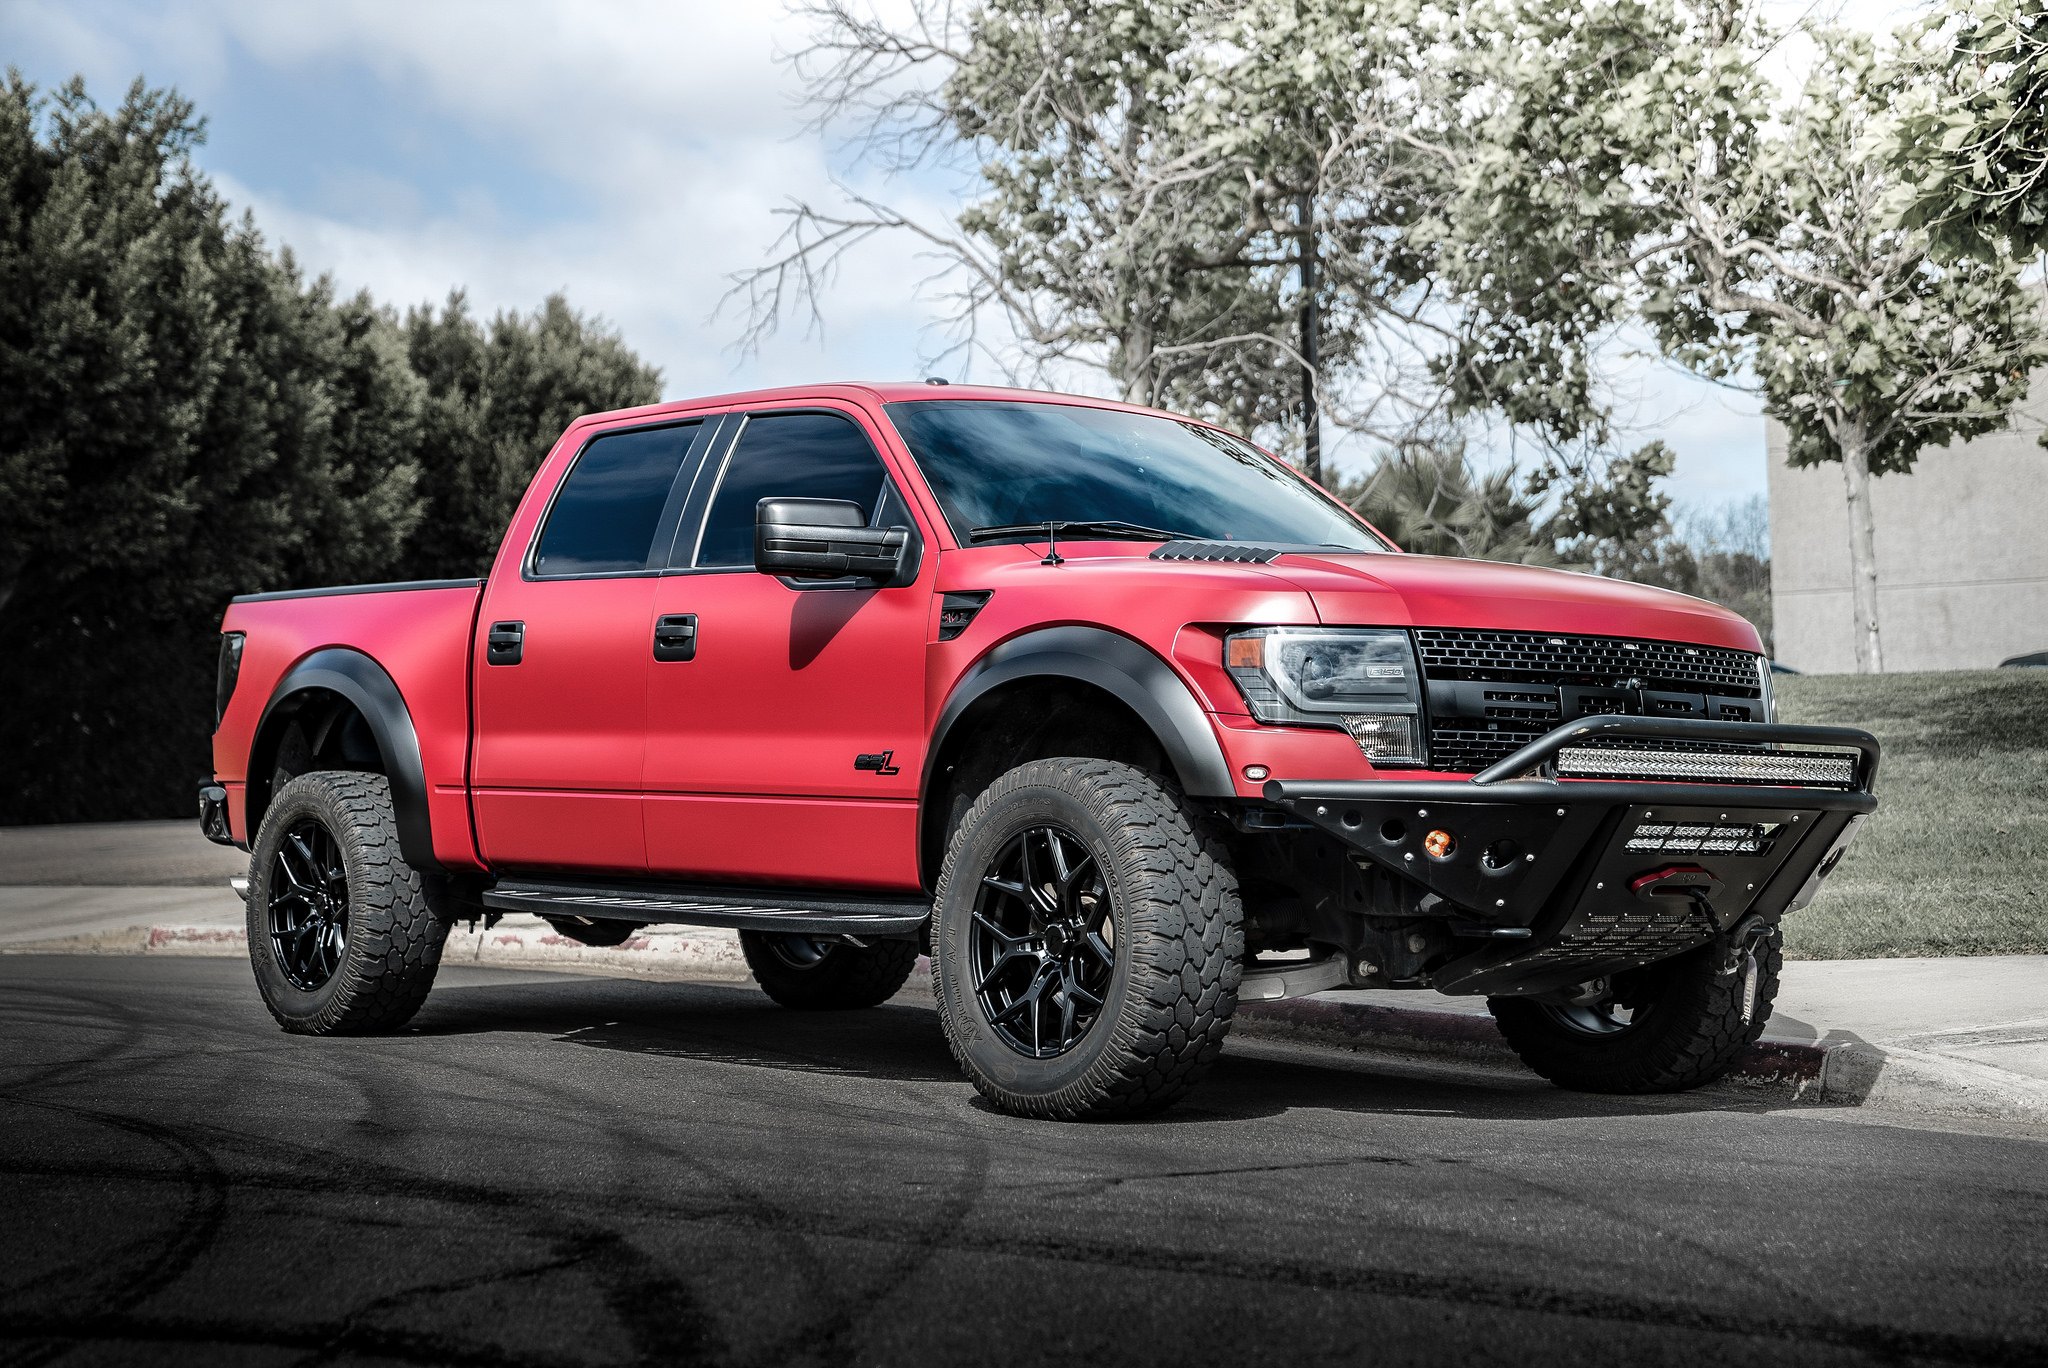 ADD Front Bumper with Skid Plate on Red Ford F-150 - Photo by Venom Rex